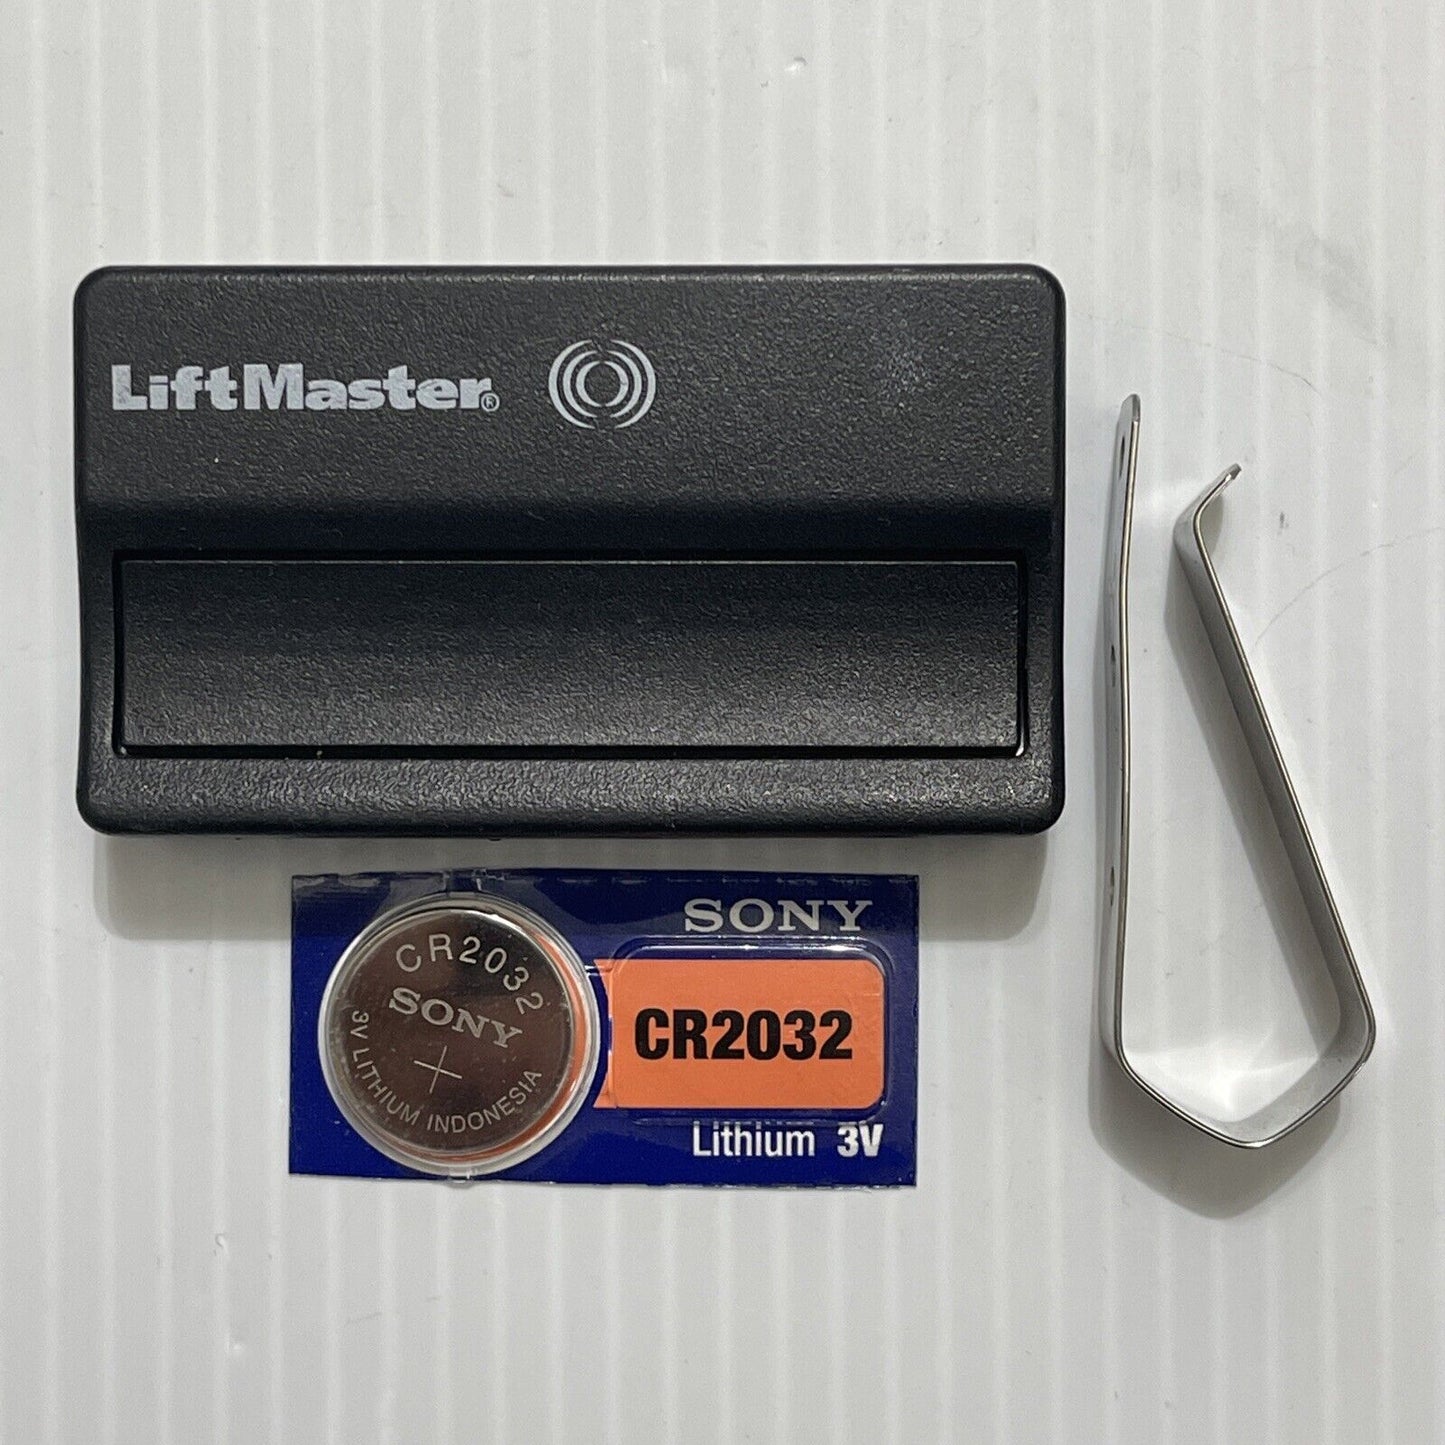 Genuine OEM Chamberlain Liftmaster 371LM 1 Button Remotes w/Clip & Battery